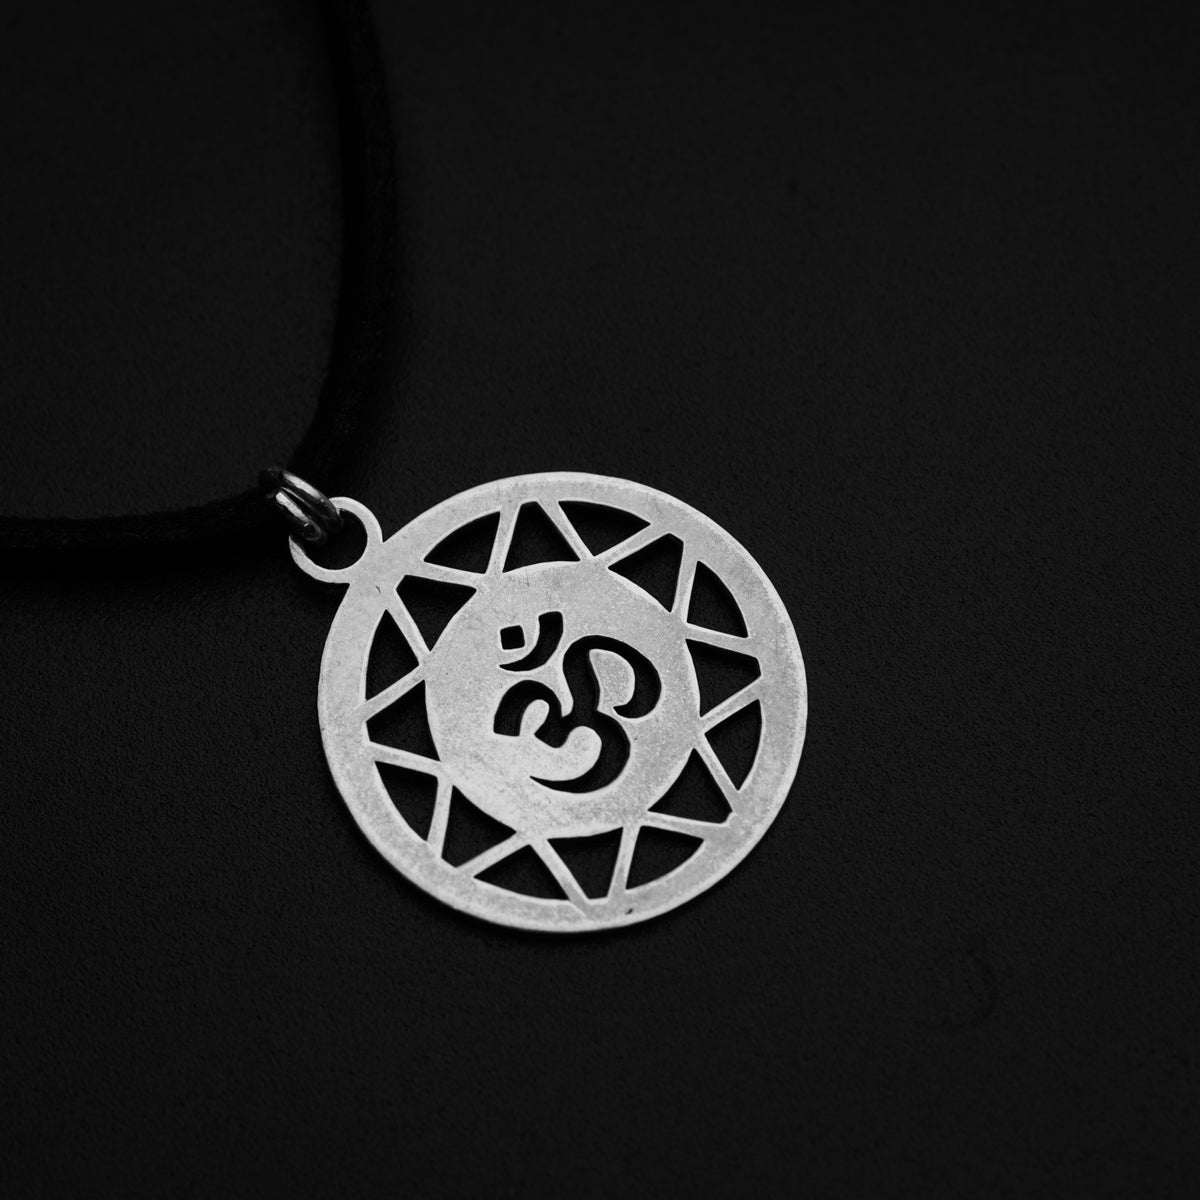 a silver pendant with an omen symbol on a black background